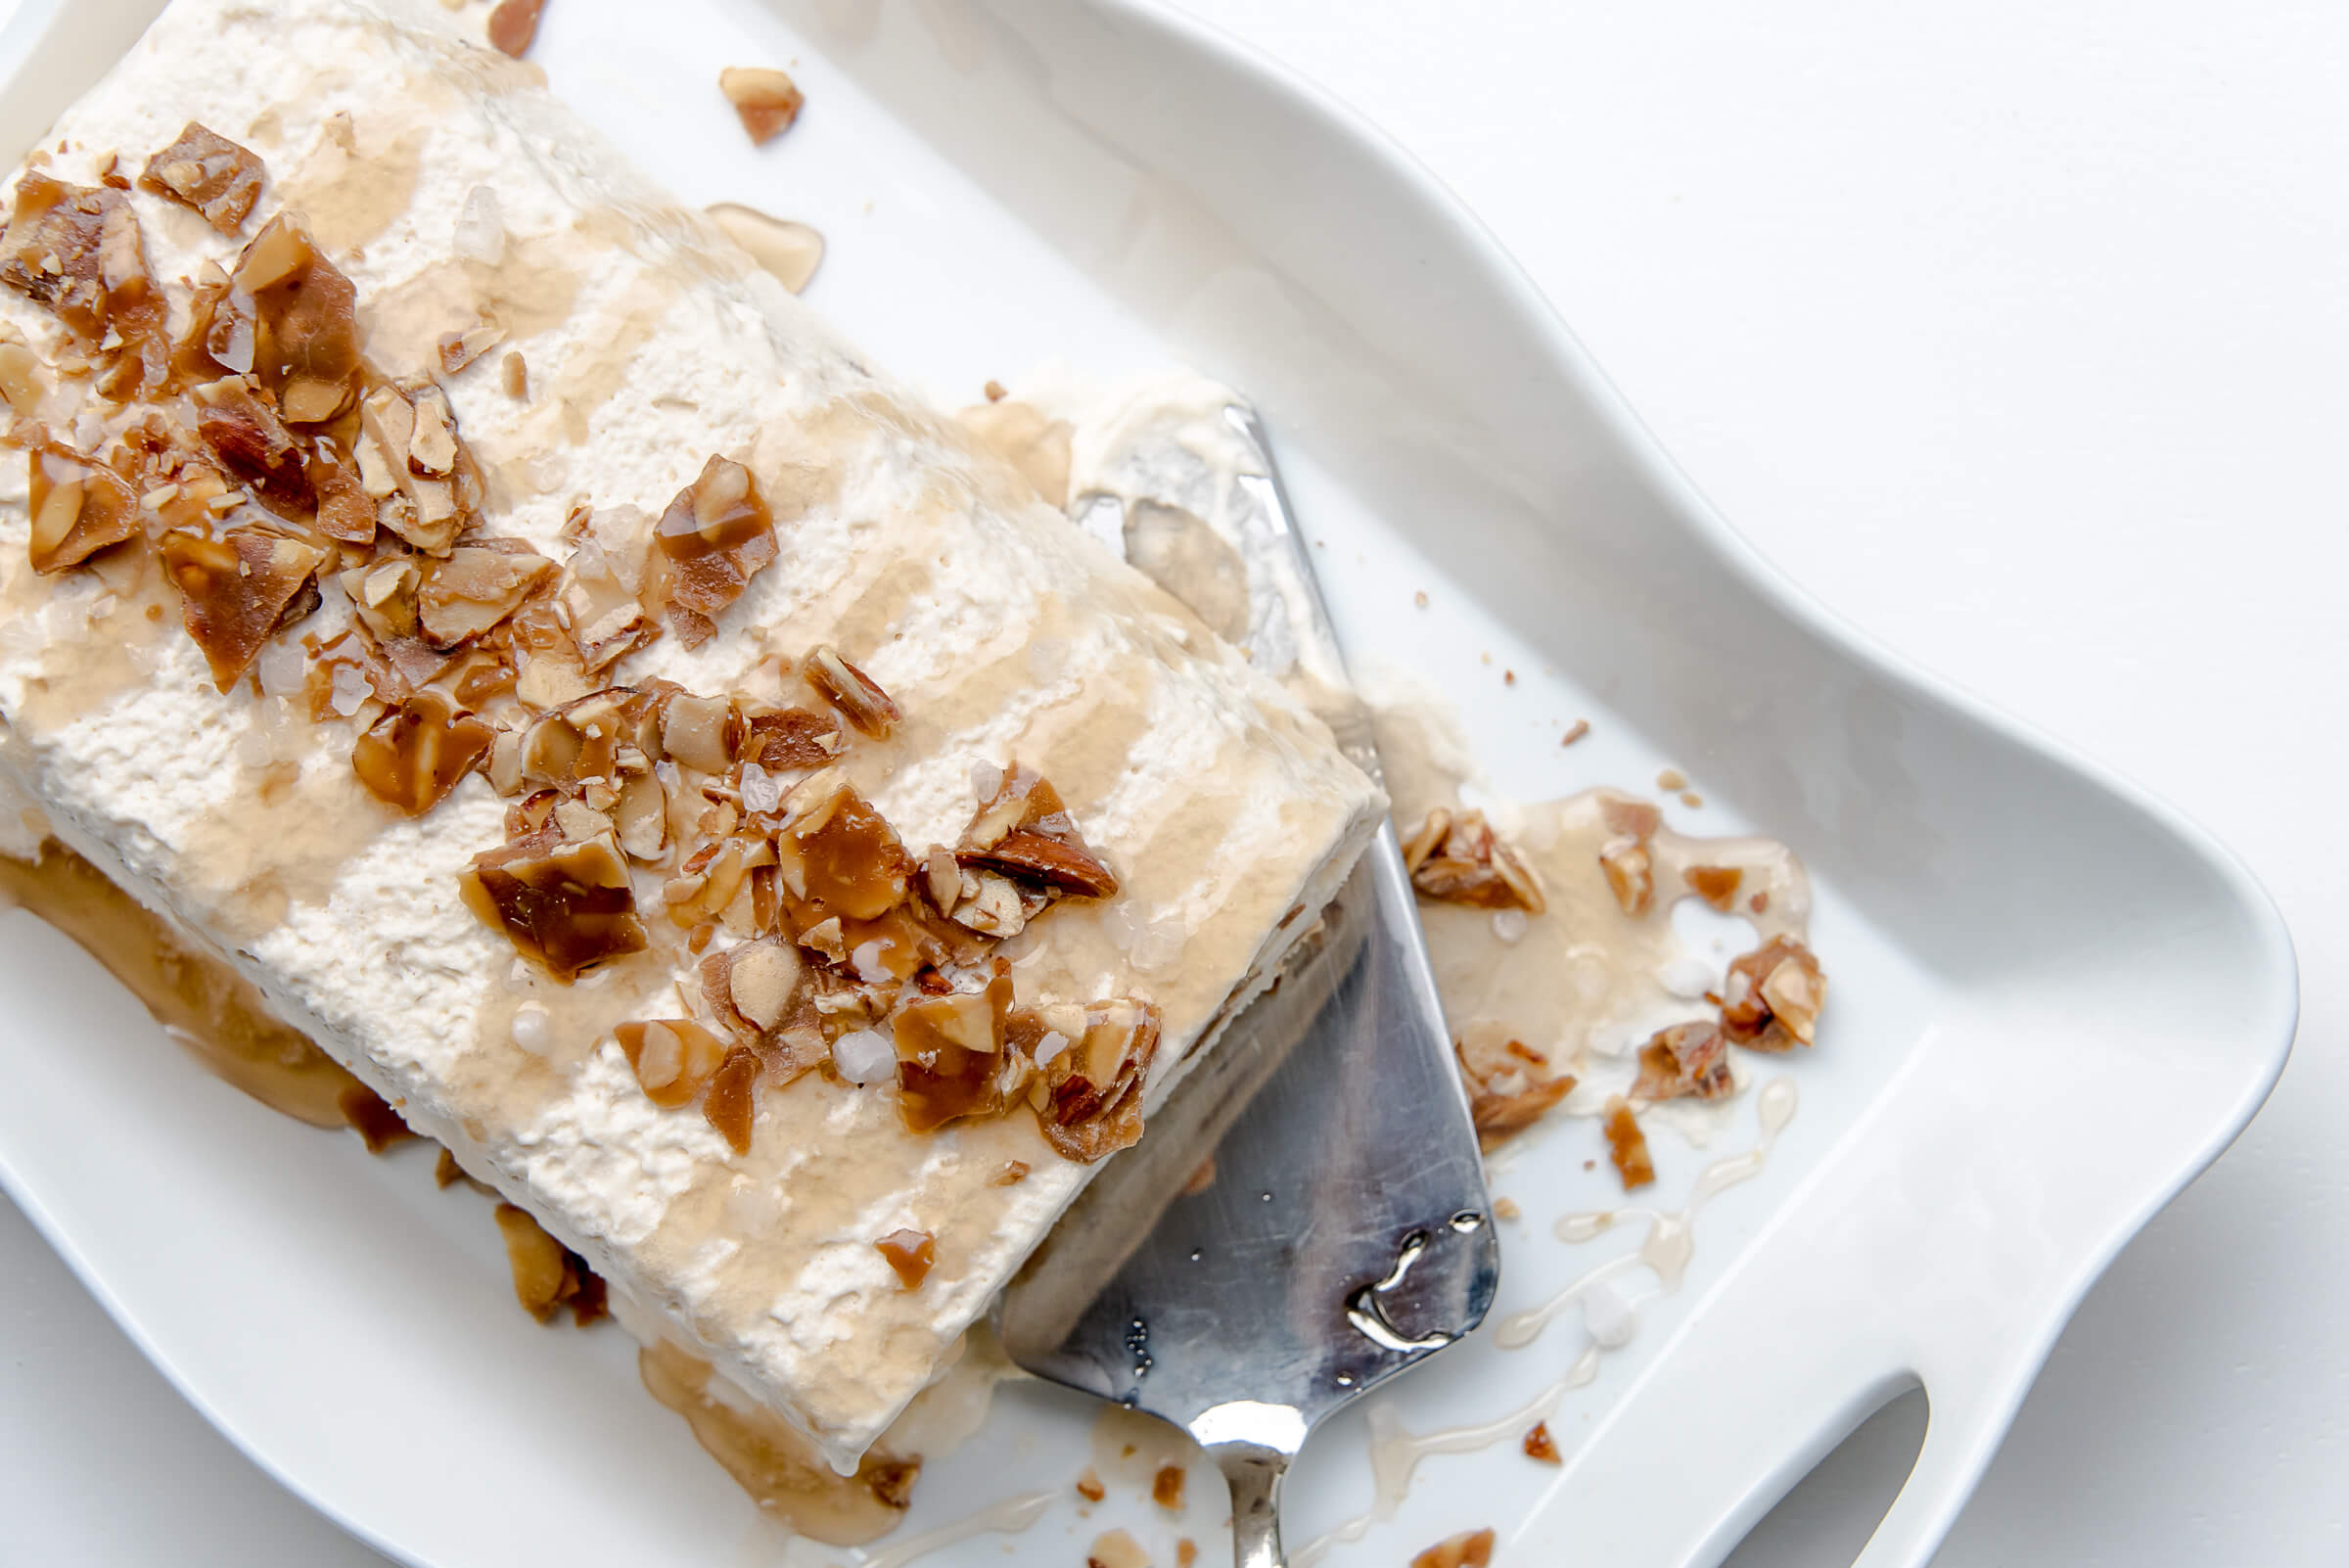 Salted Caramel Semifreddo with Candied Almonds